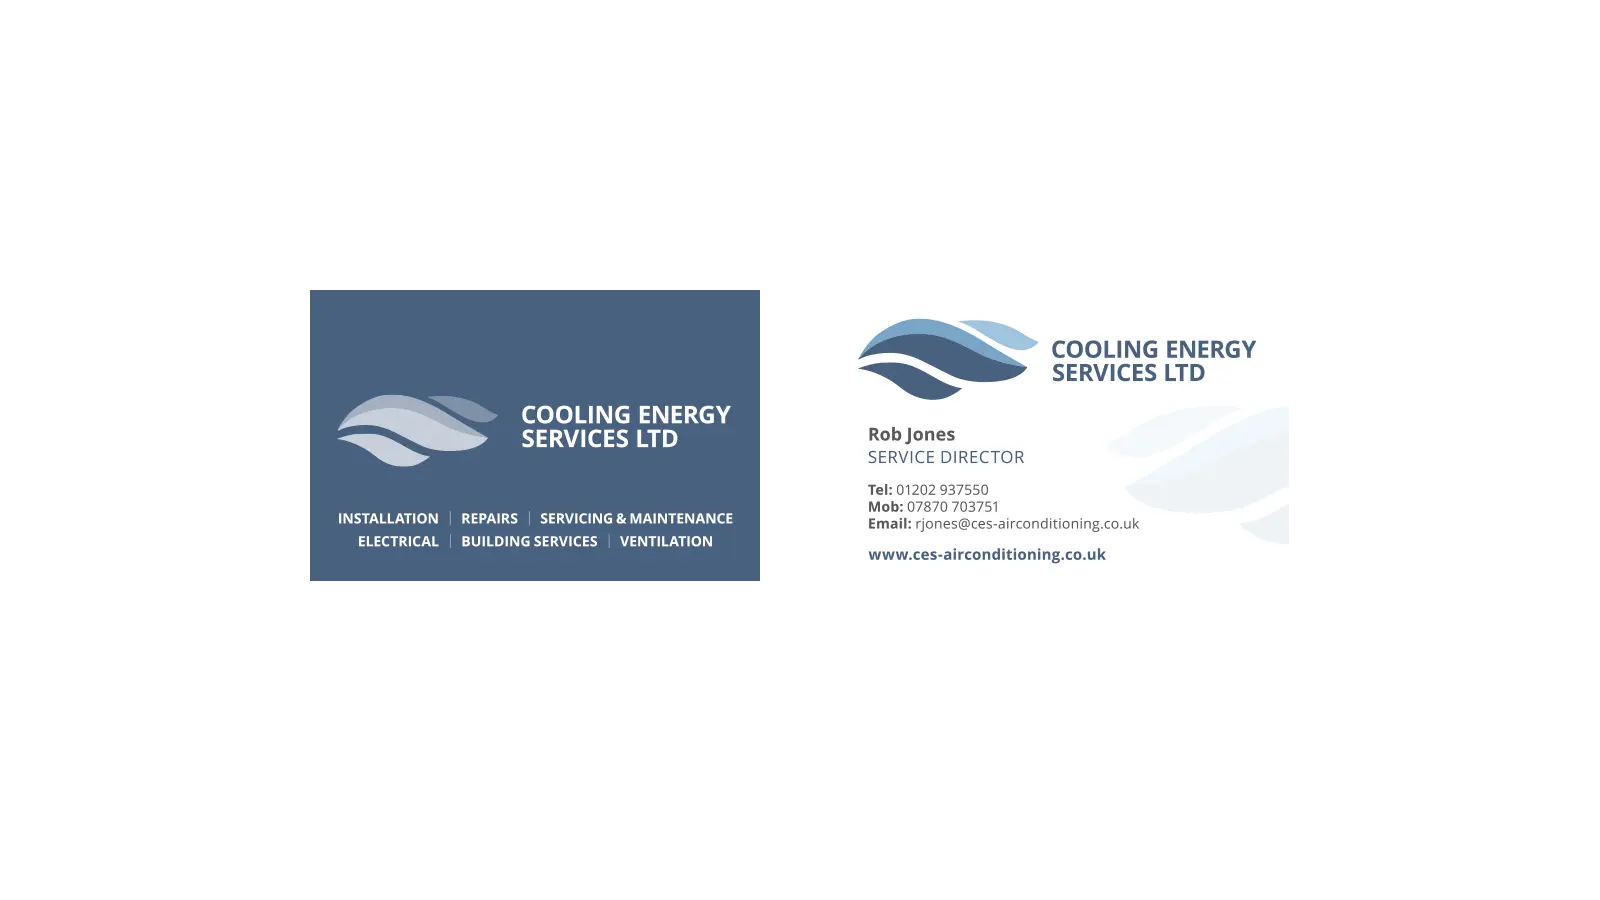 Cooling Energy Services Business Card designs